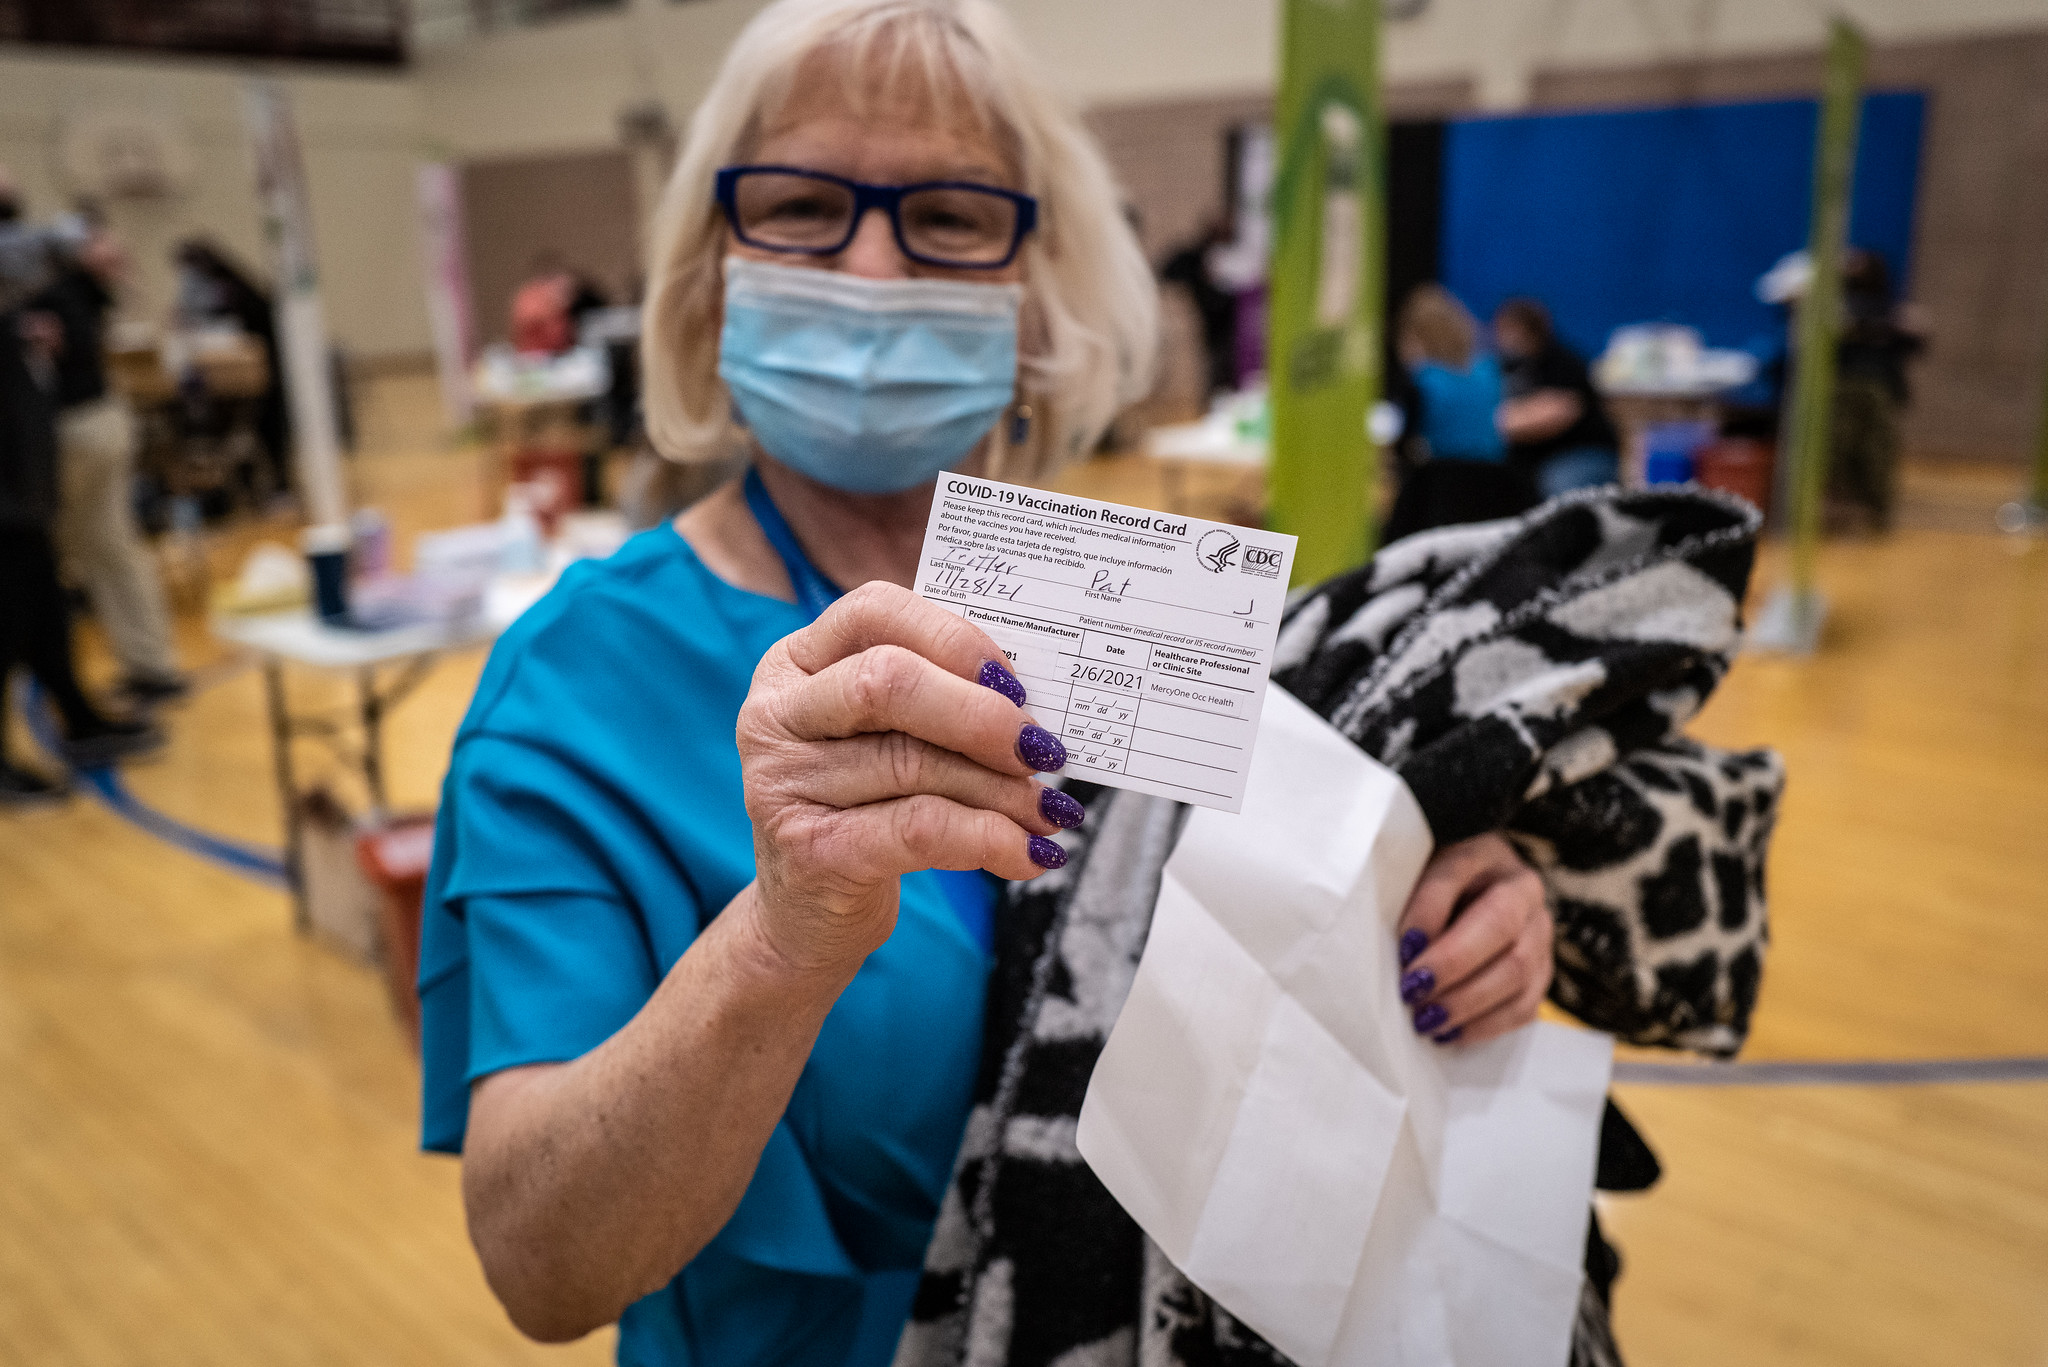 A person holds up their Covid-19 vaccine card